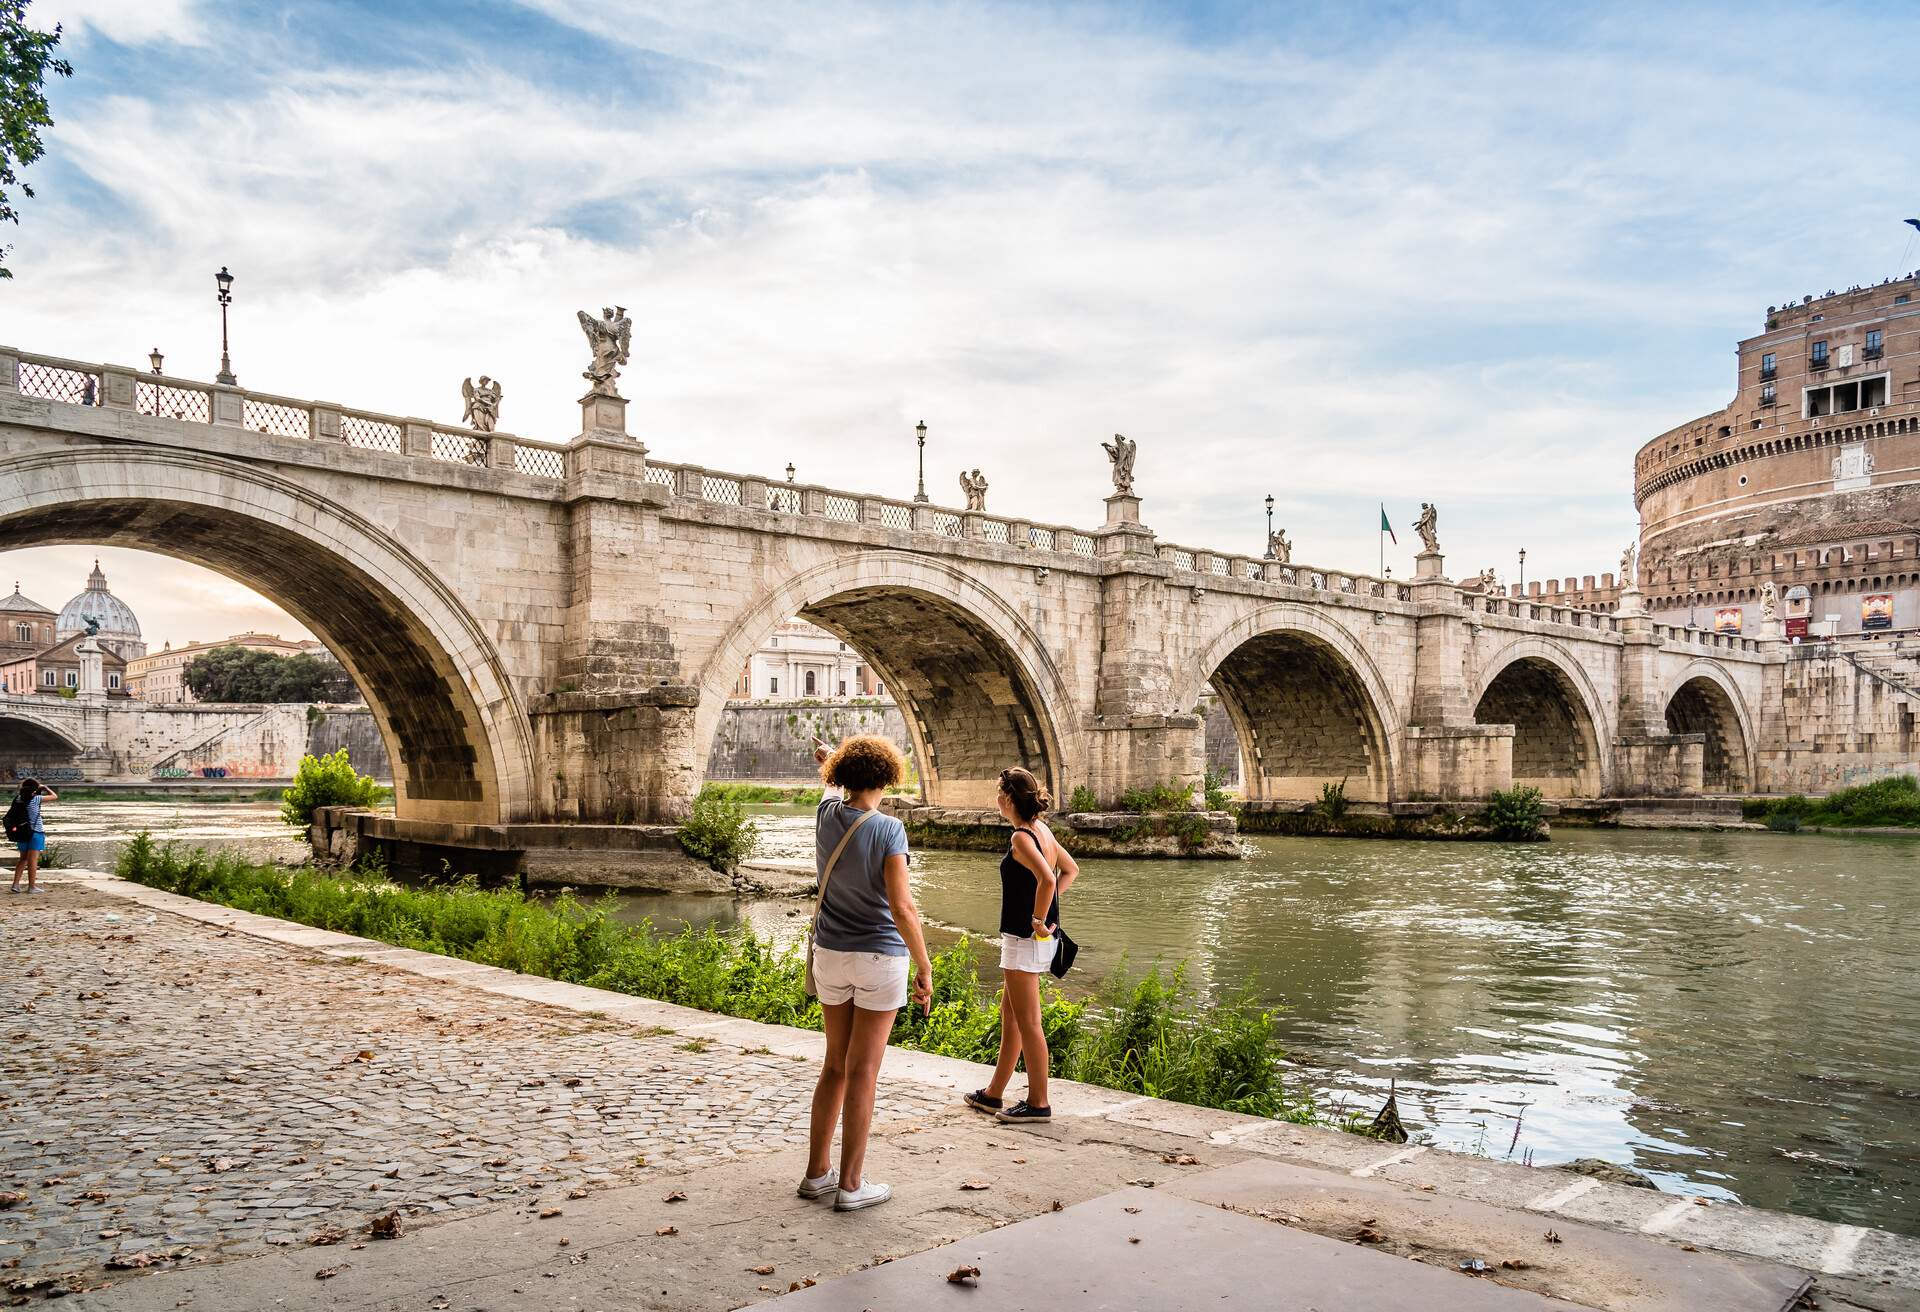 DEST_ITALY_ROME_PONTE-SANT-ANGELO_GettyImages-760240797.jpg